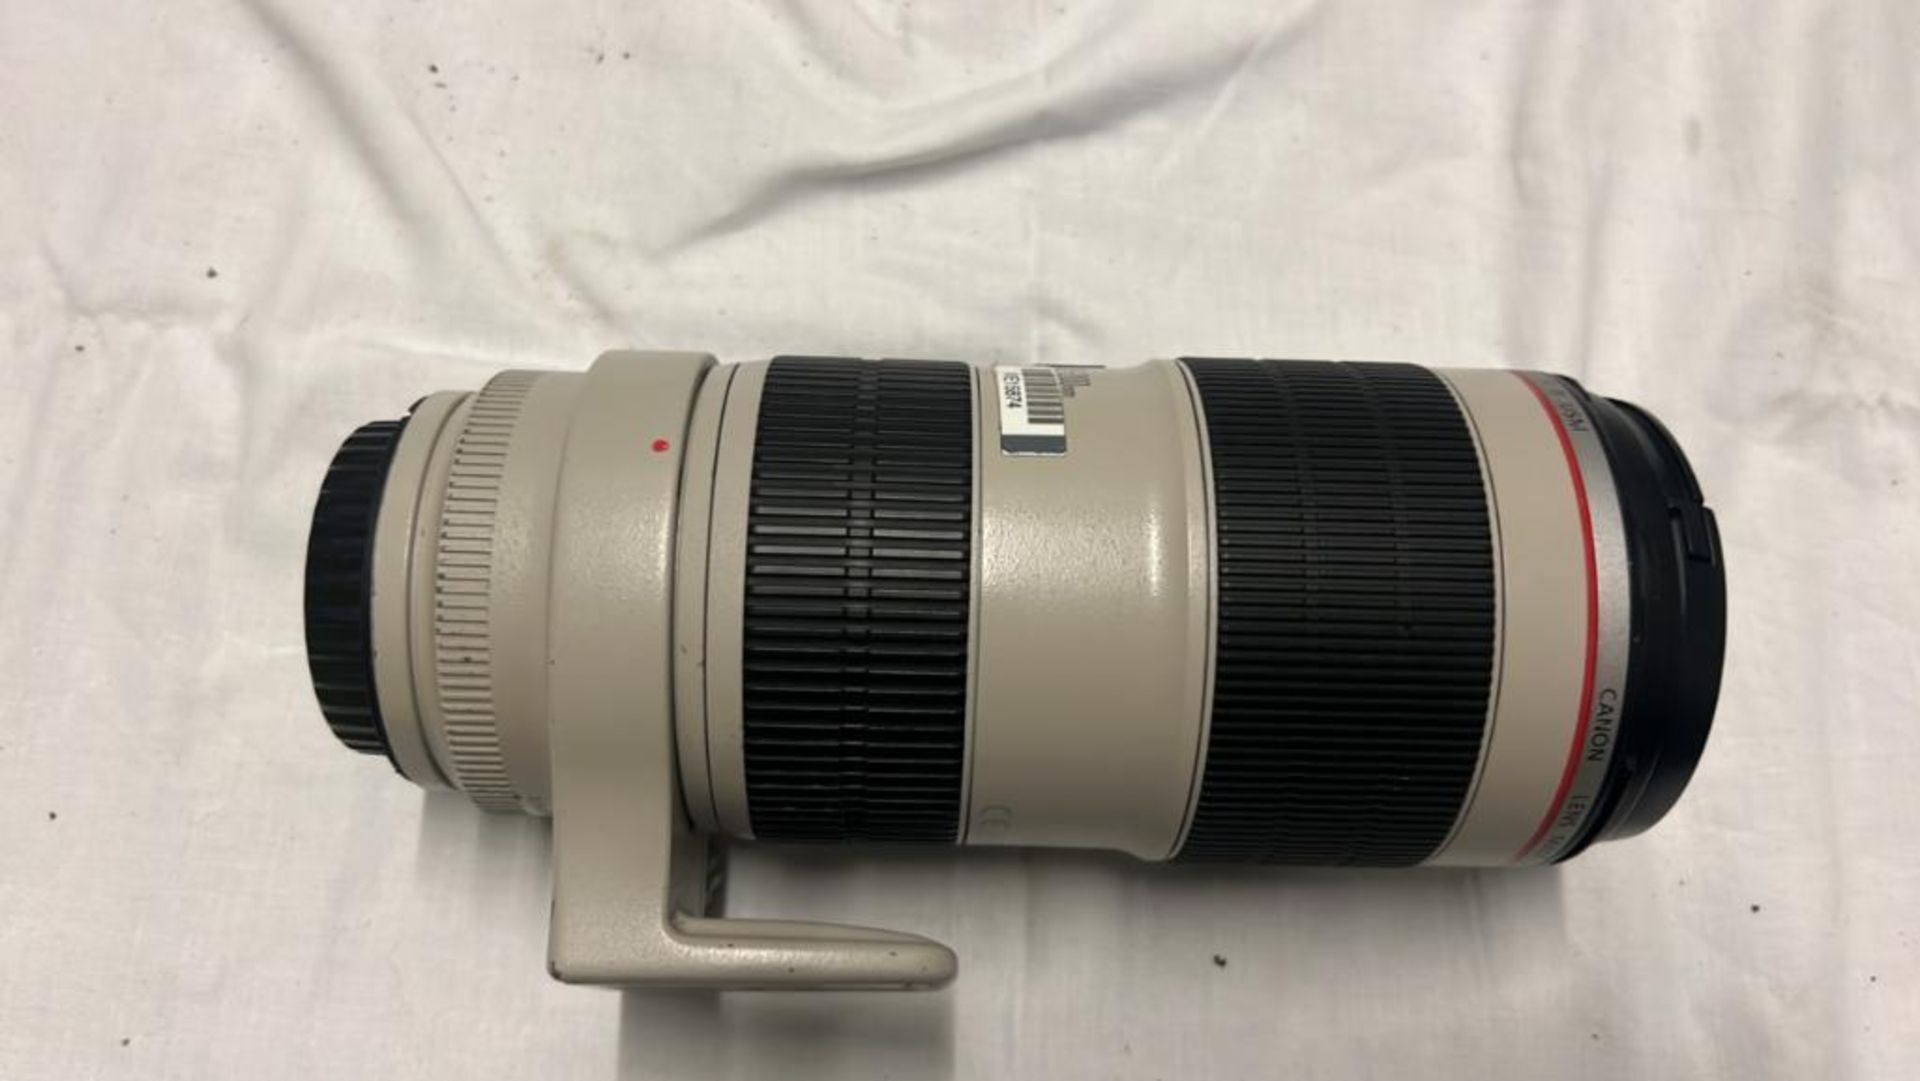 Canon EF 70-200mm f/2.8L USM Lens with Carry Bag  SN: 3160000344 - Image 3 of 5